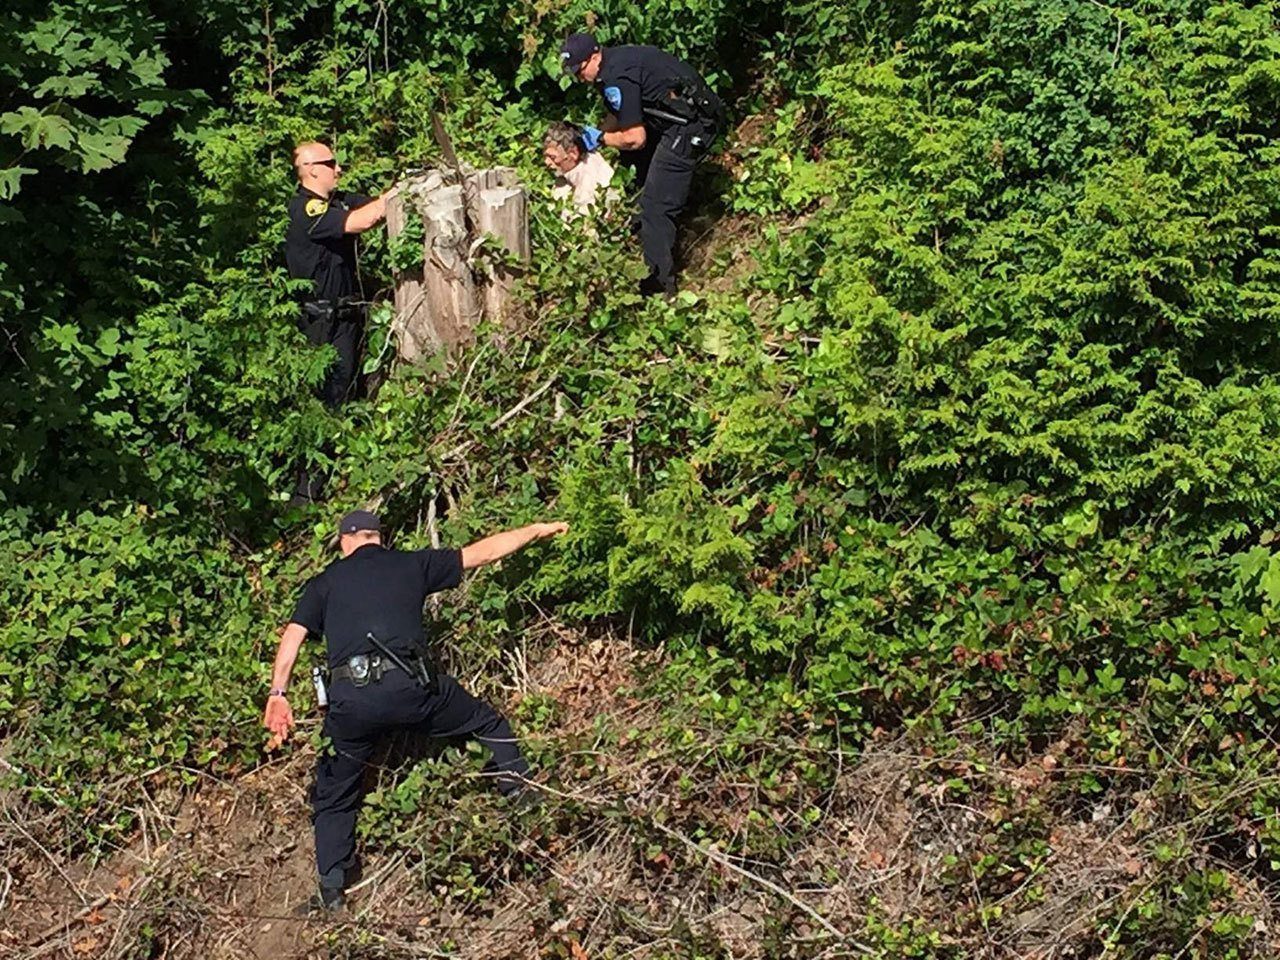 The suspect was captured by Woodway and Edmonds police. (Photo courtesy of Woodway Police)